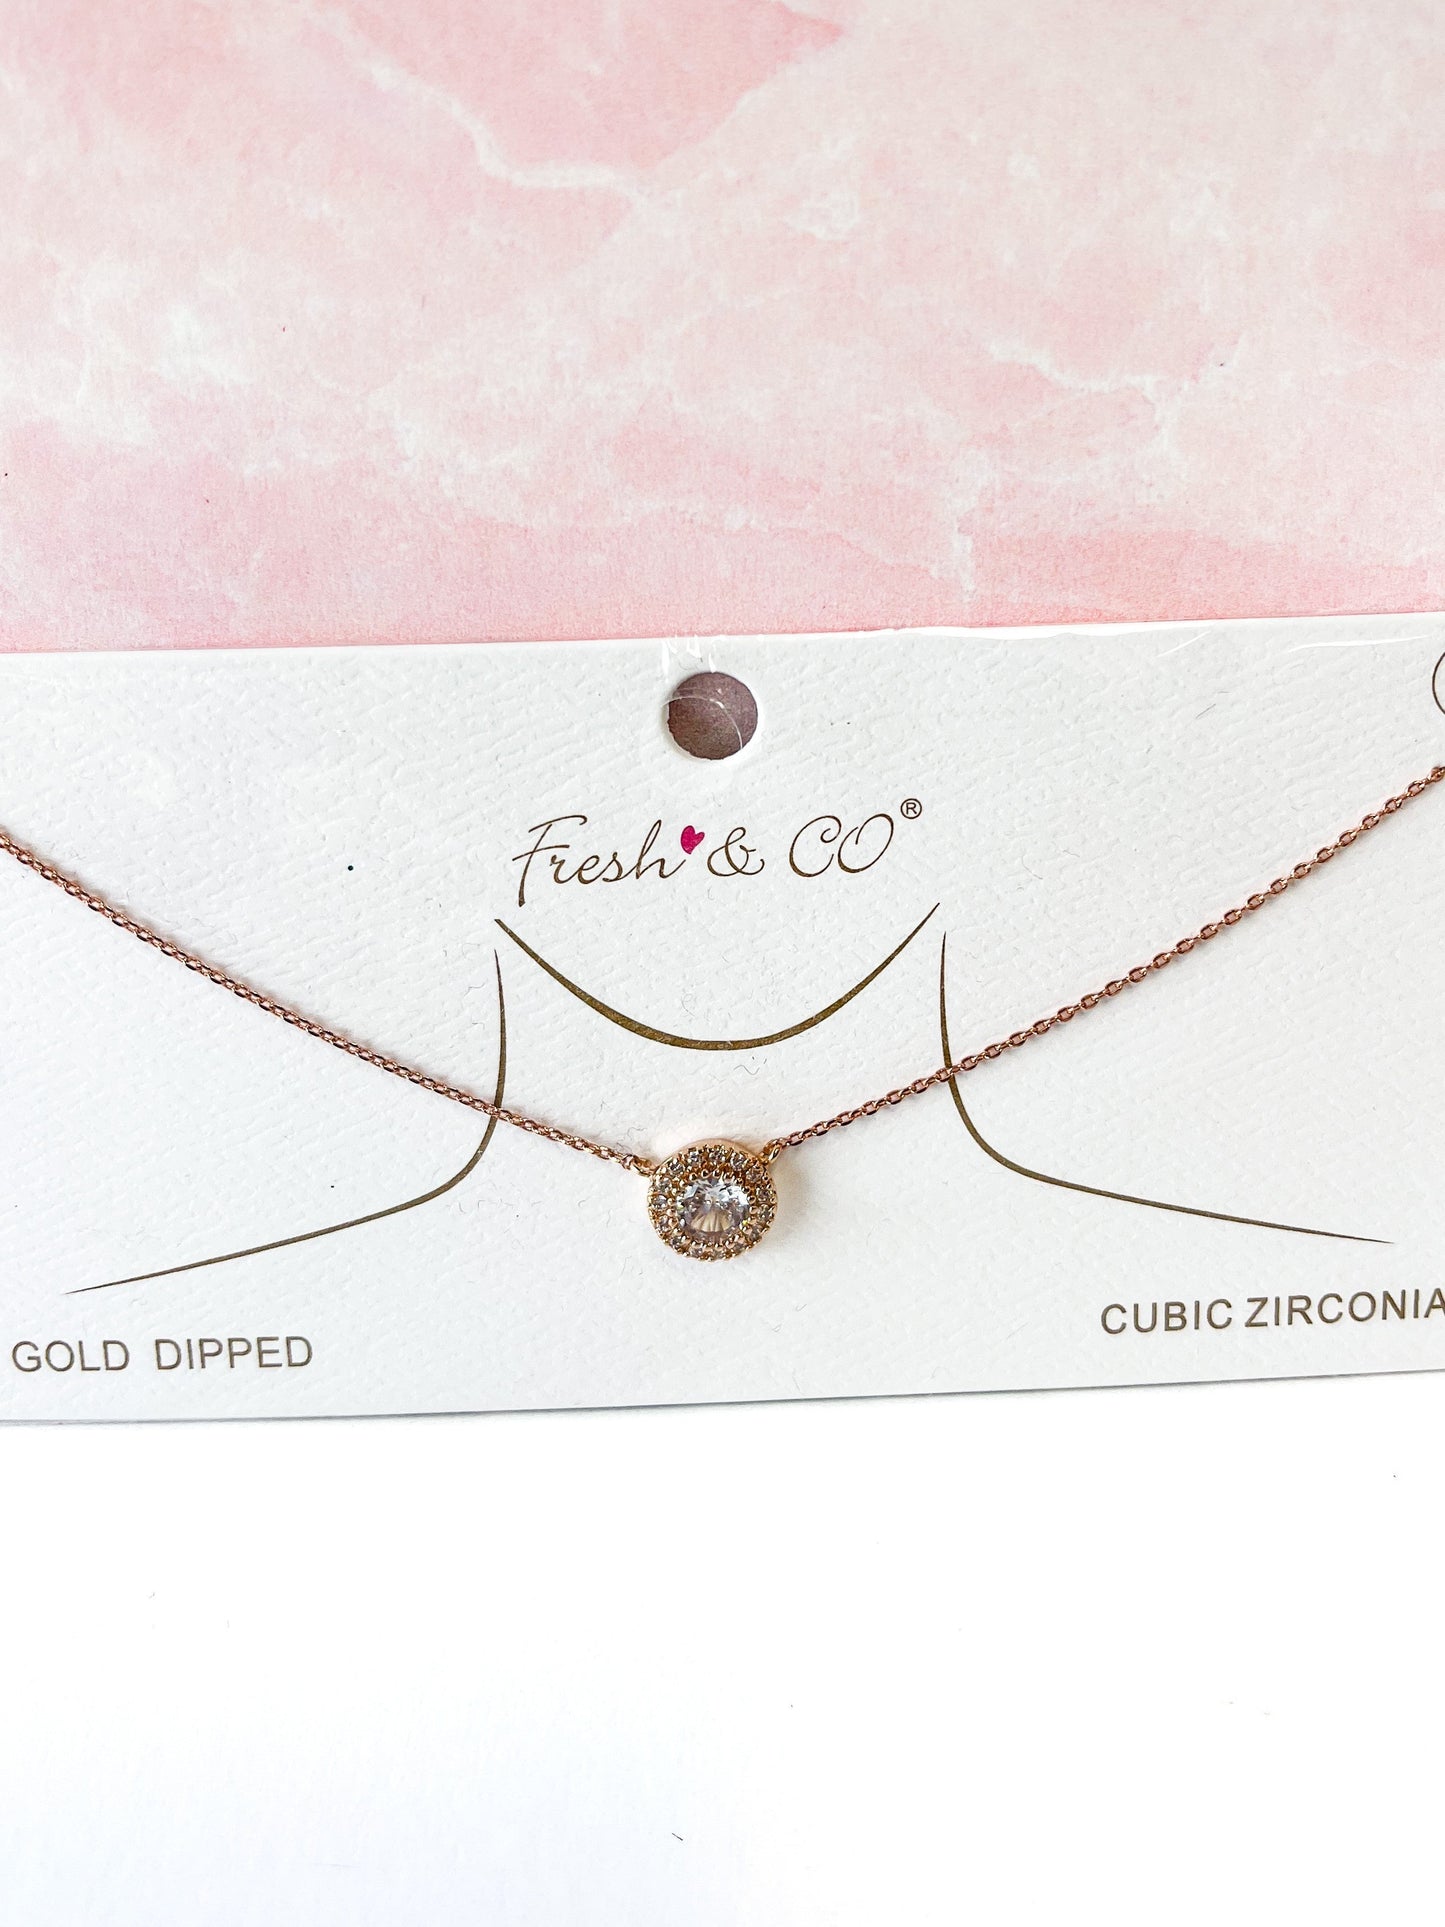 Gold Dipped Cubic Zirconia Big Stone Pendant Necklace